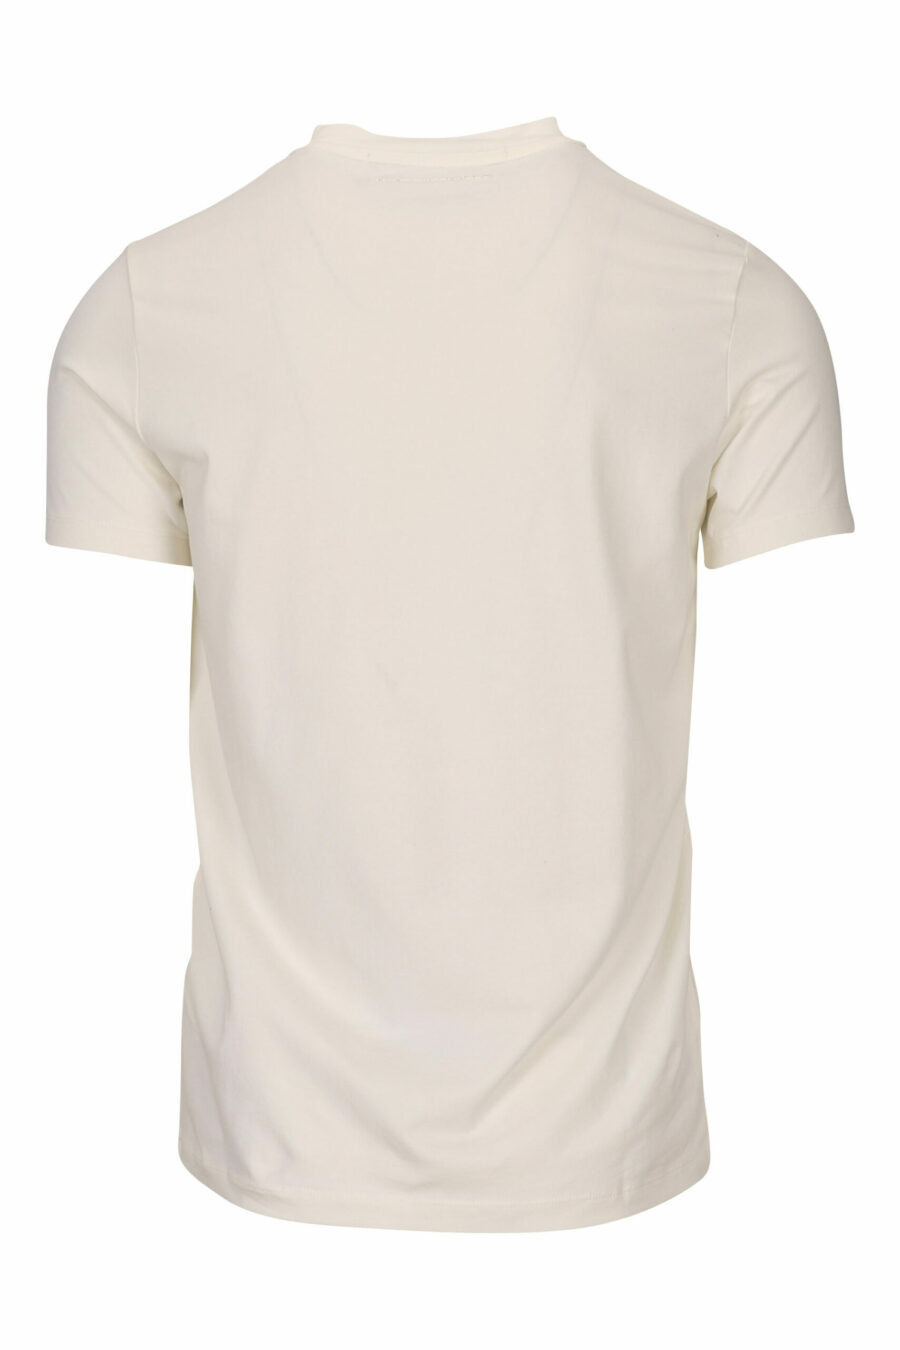 White T-shirt with monochrome maxilogo "rue st guillaume" - 4062226678124 1 scaled